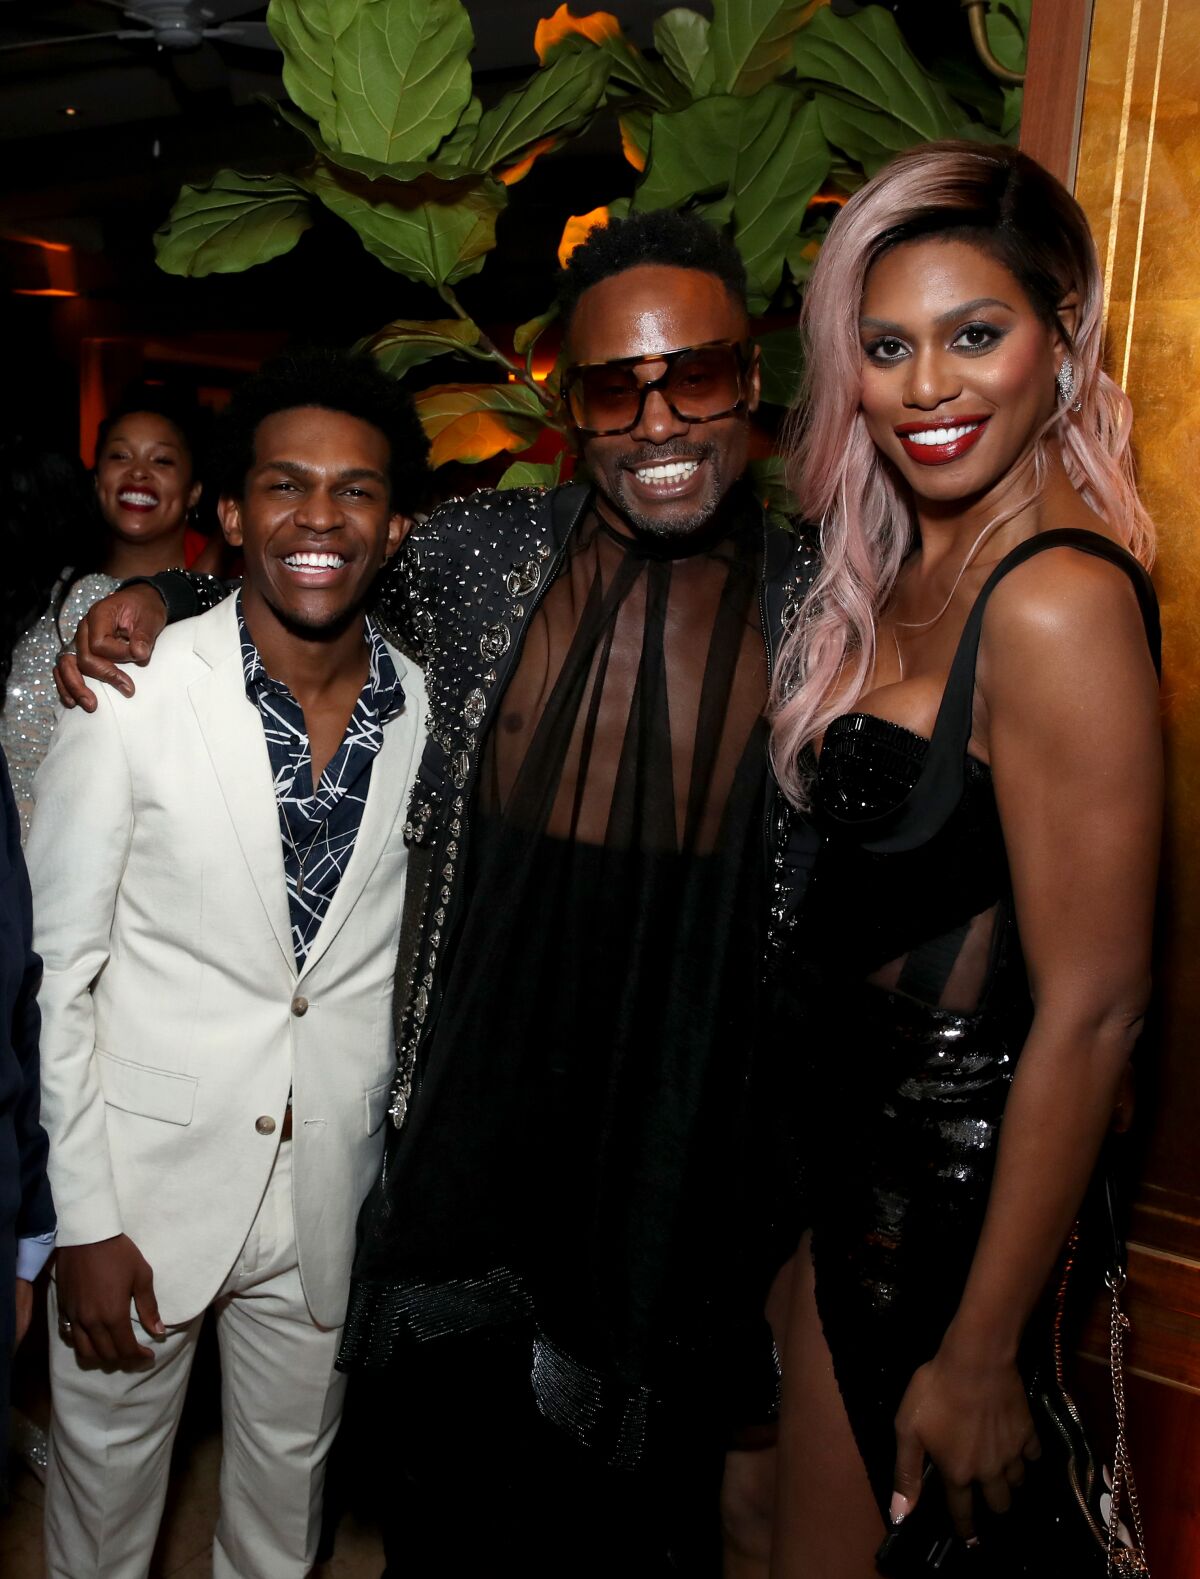 Camrus Johnson, from left, Billy Porter and Laverne Cox at the 2019 pre-Emmys party at Sunset Tower Hotel in West Hollywood.